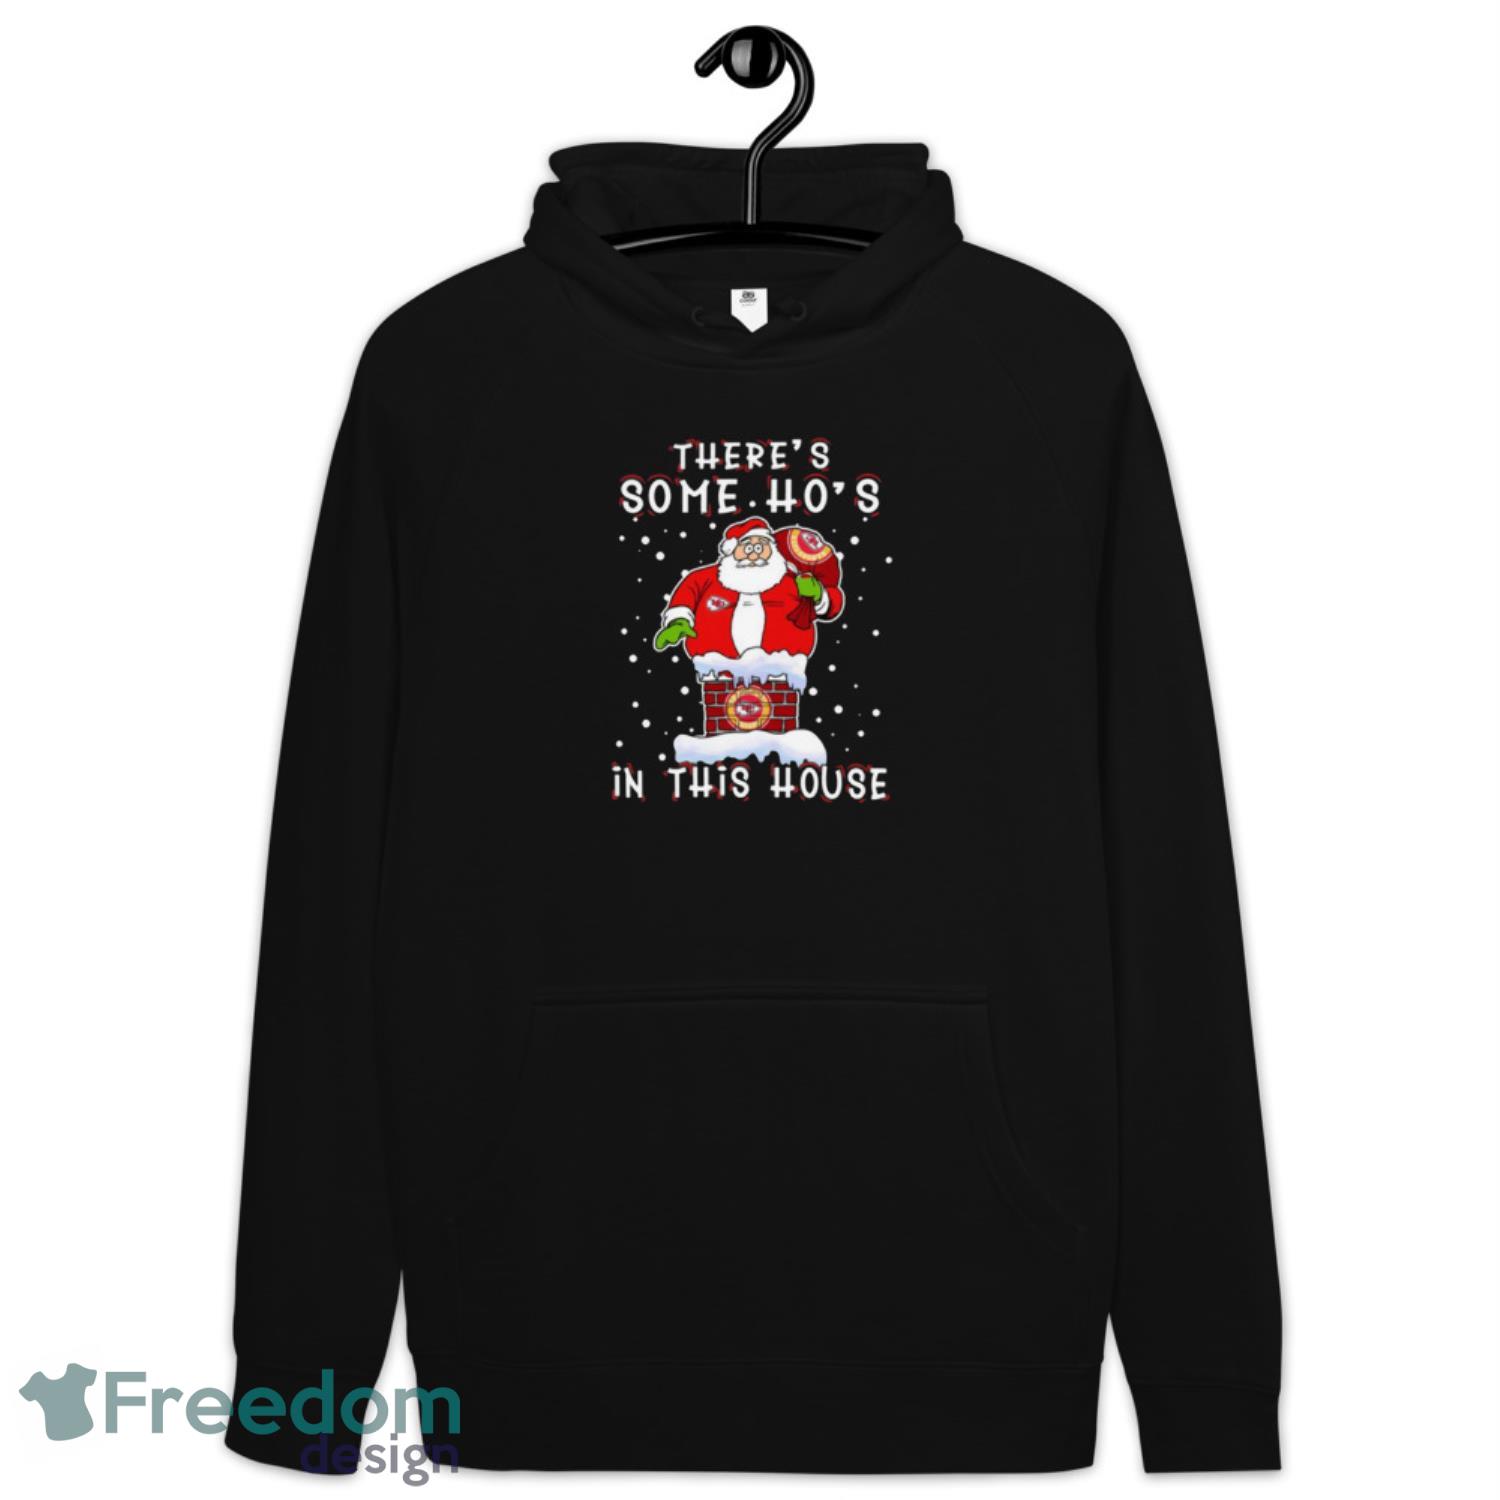 Kansas City Chiefs Christmas There Is Some Hos In This House Santa Stuck In The Chimney Shirt